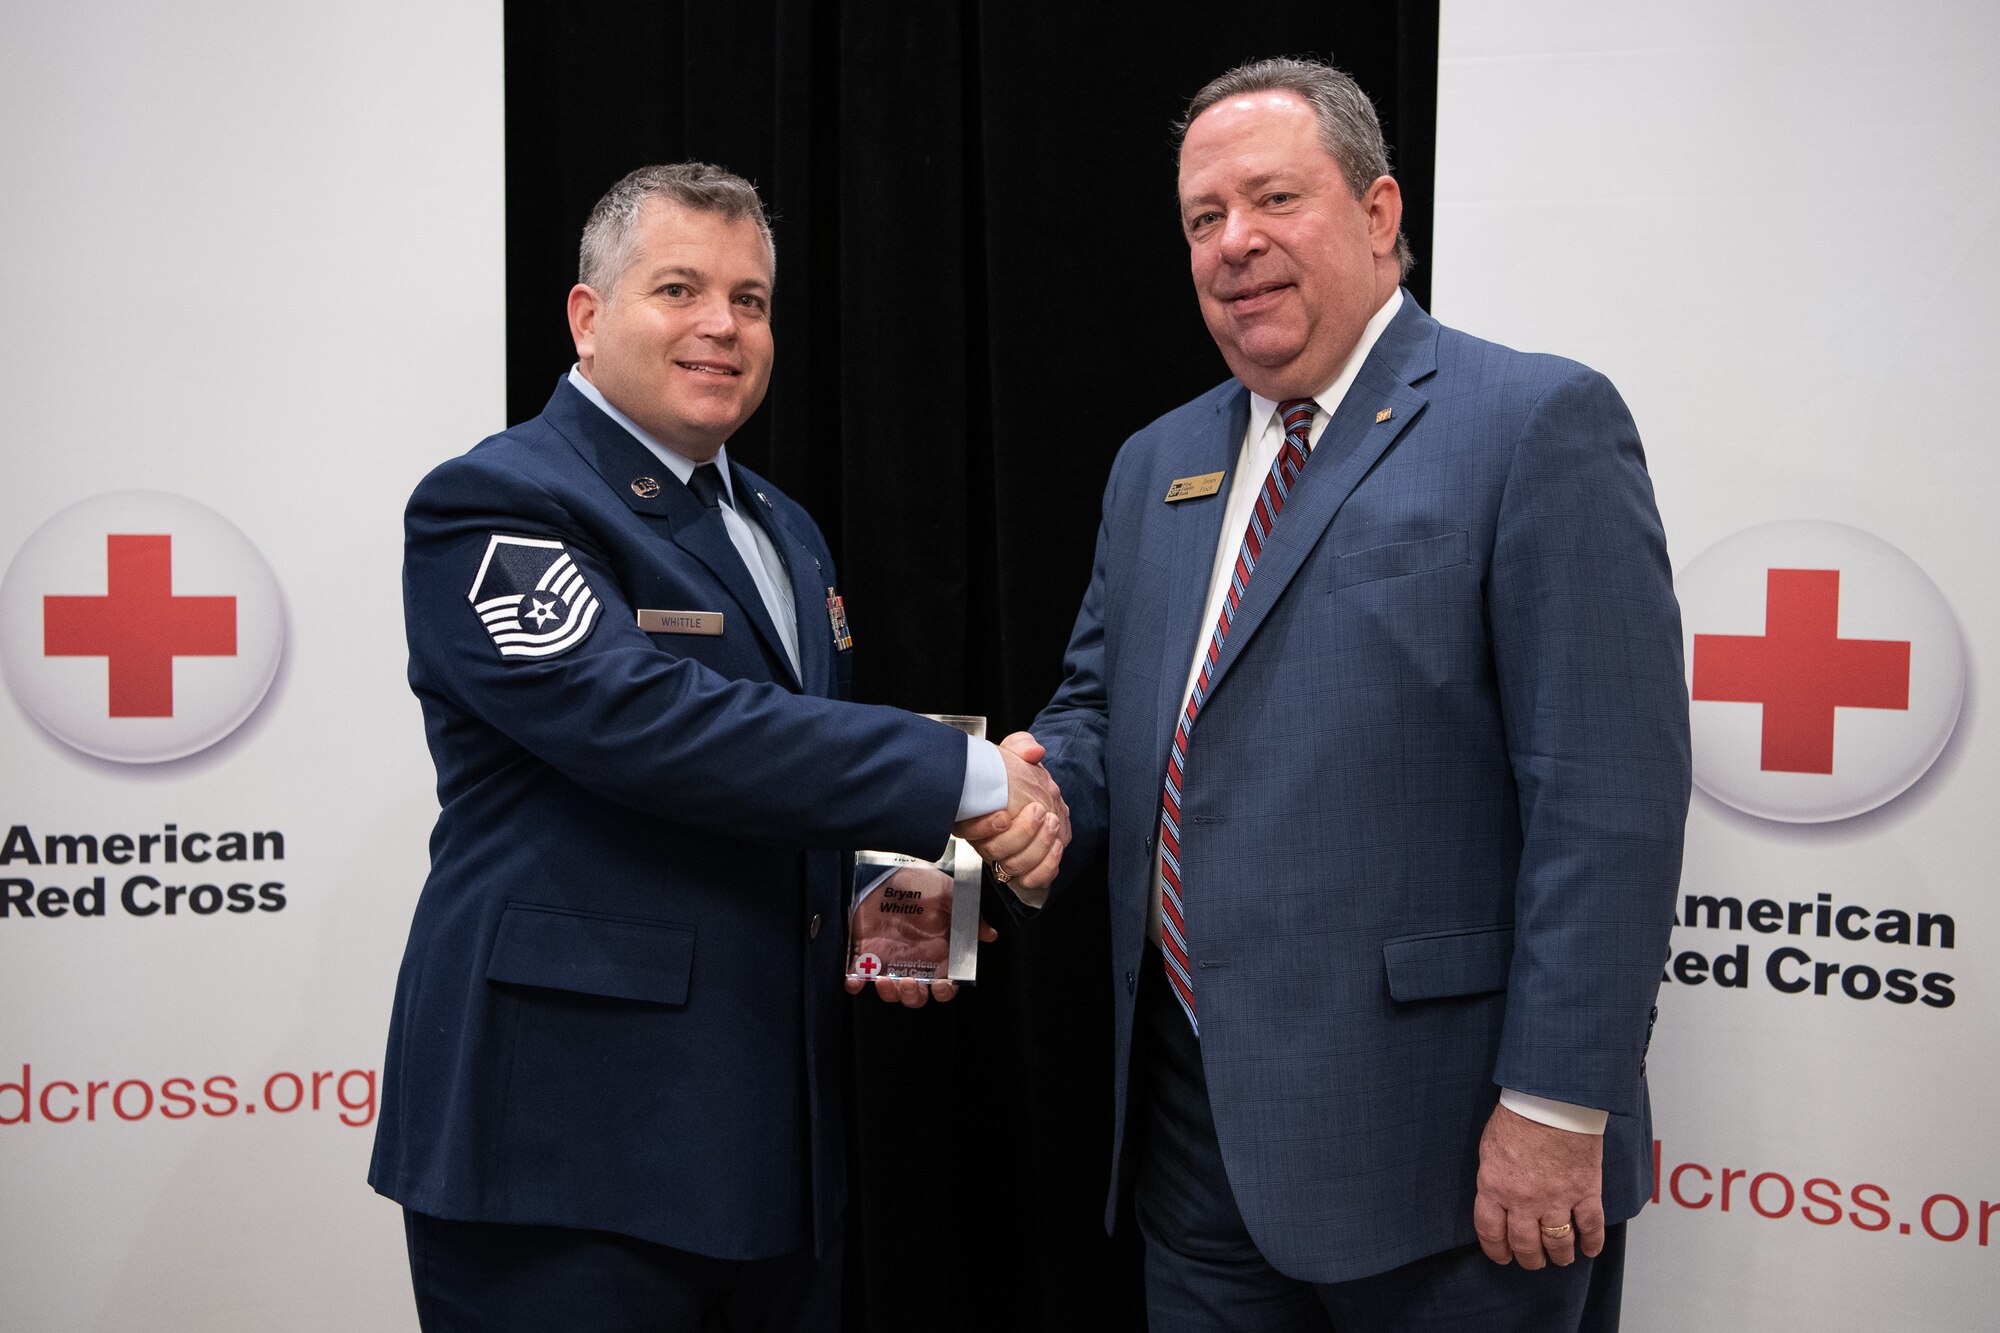 James Finch (right), First Fidelity Bank, shakes hands with Oklahoma Air National Guard Master Sgt. Bryan Whittle, assigned to the 205th Engineering and Installation Squadron at Will Rogers Air National Guard Base, Oklahoma City, after naming him as the American Red Cross of Oklahoma military hero of the year during the 2019 Heroes Breakfast in Oklahoma City, March 5, 2019. Whittle was one of eight people honored for actions in six categories – including military, first responder, healthcare professional, community impact, disaster services and youth – during the first ever Red Cross Heroes Breakfast in Oklahoma City. (U.S. Air National Guard Photo by Tech. Sgt. Kasey M. Phipps)